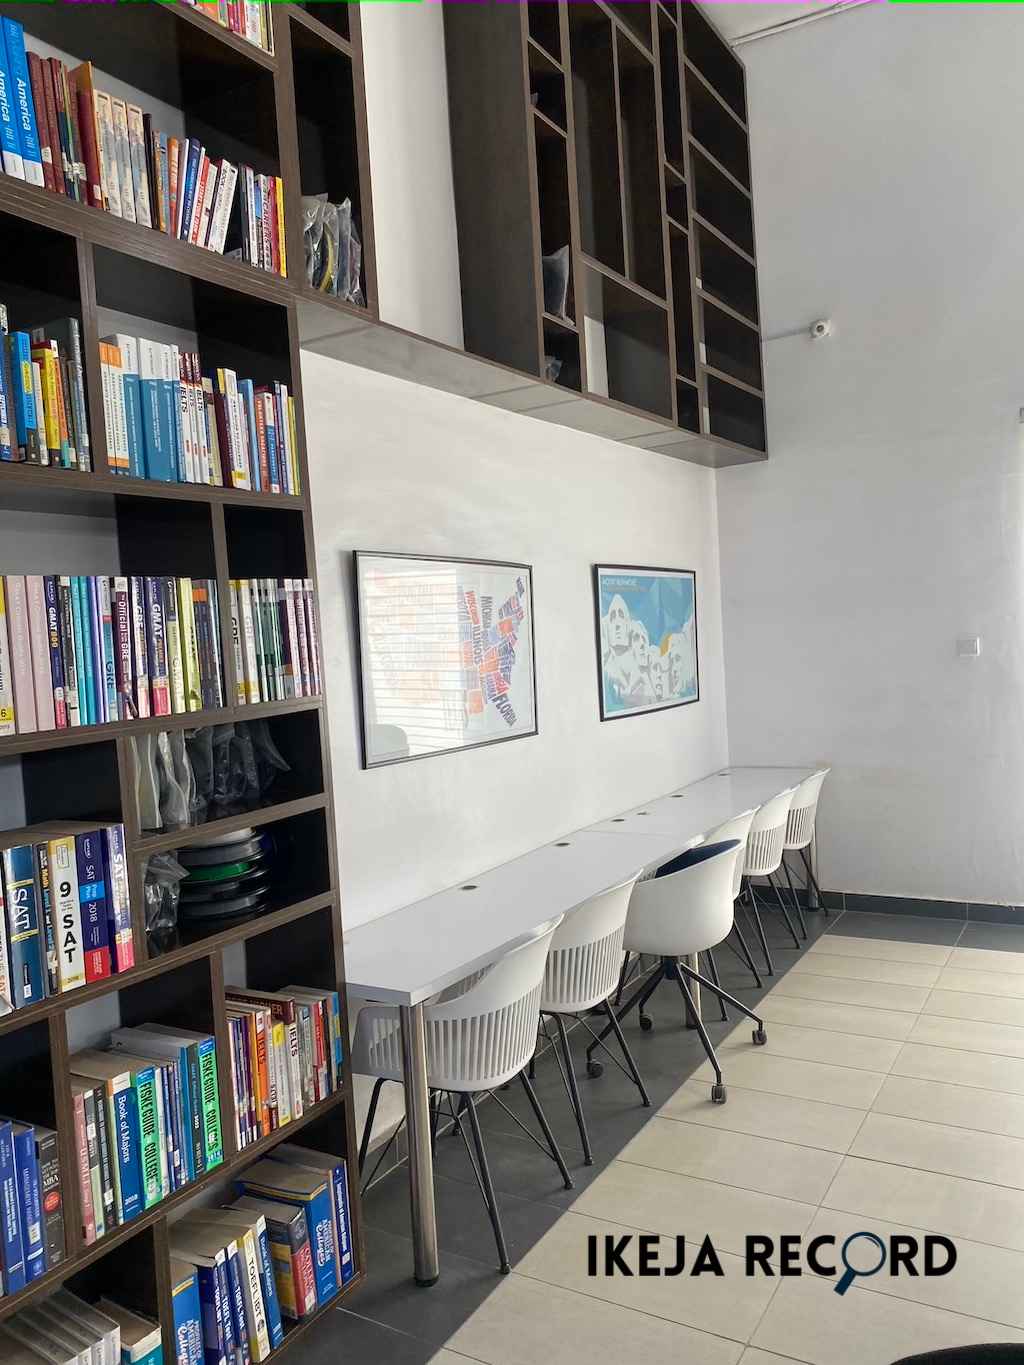 The American Corner Ikeja boasts of clean, tidy spaces conducive for work.